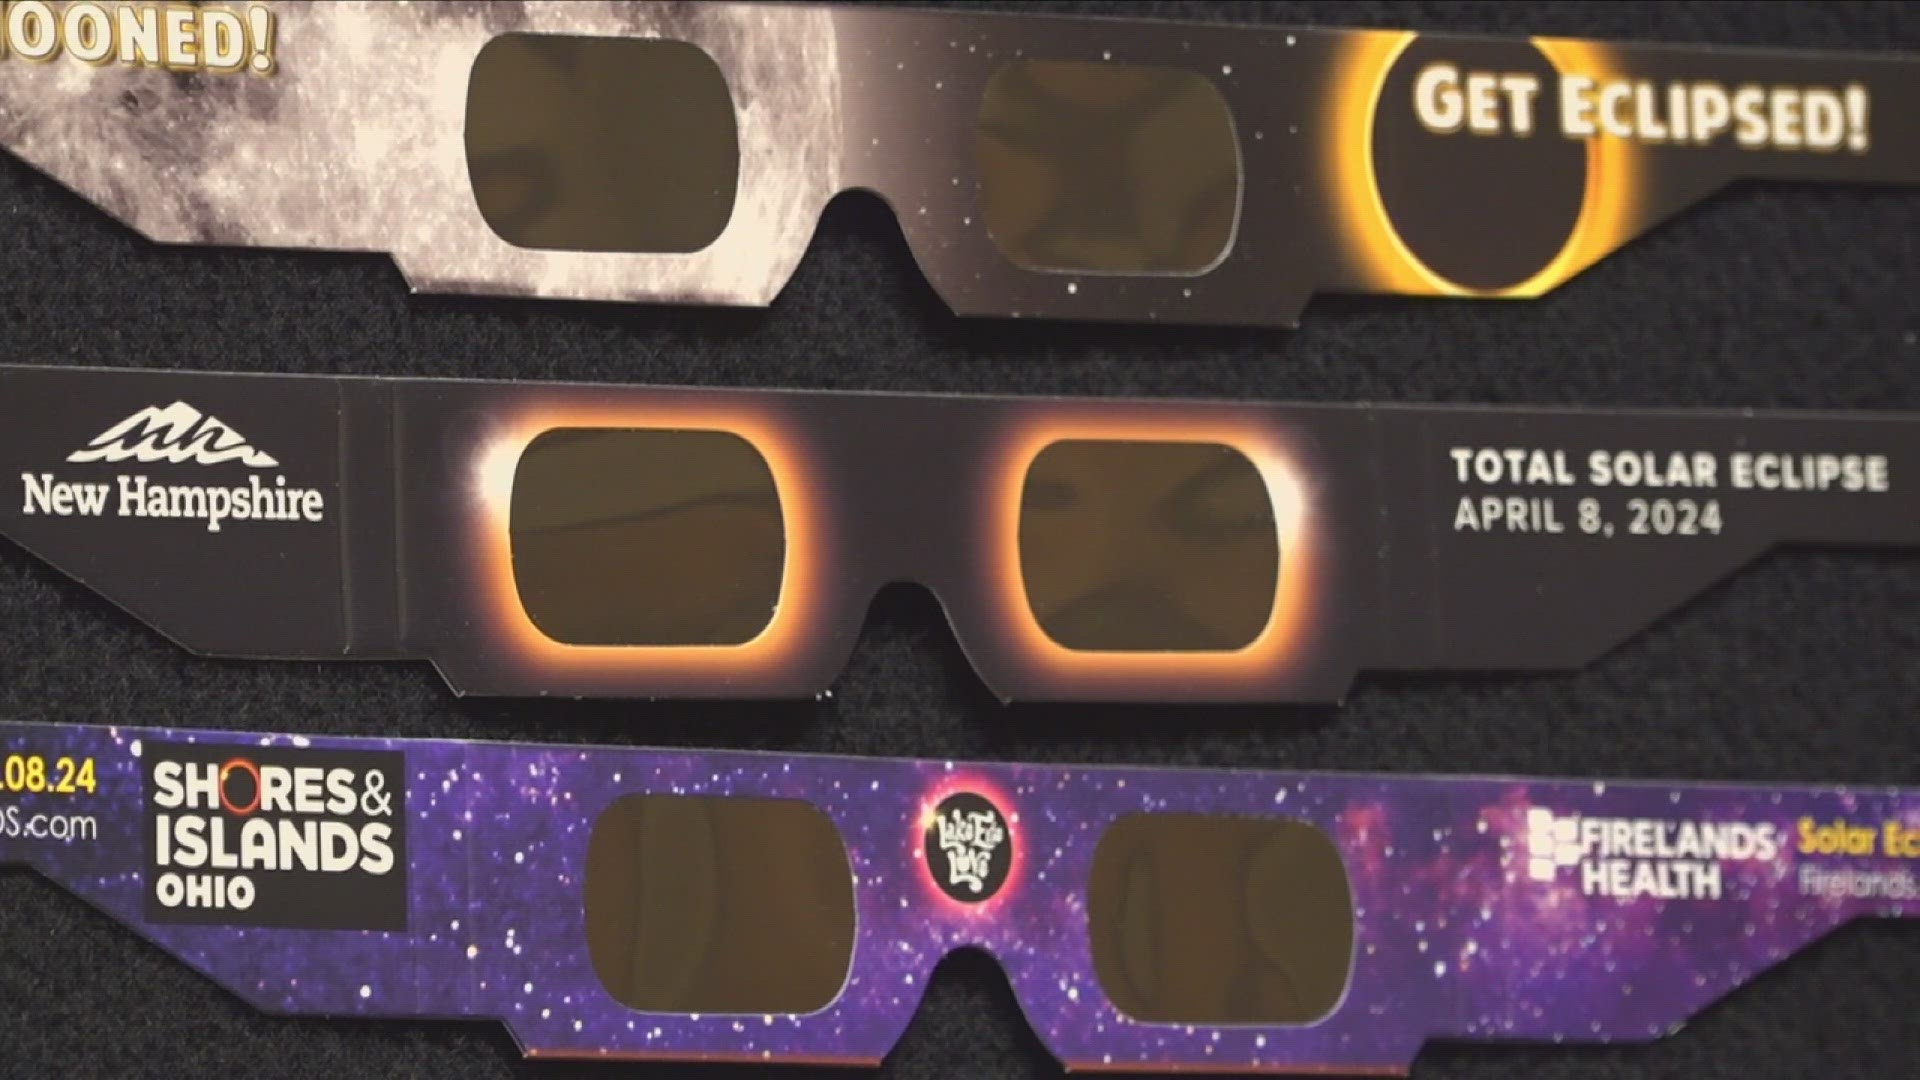 In 2017, American Paper Optics created 45 million eclipse glasses, but for 2024, the business is expecting to up its game to 75 million.